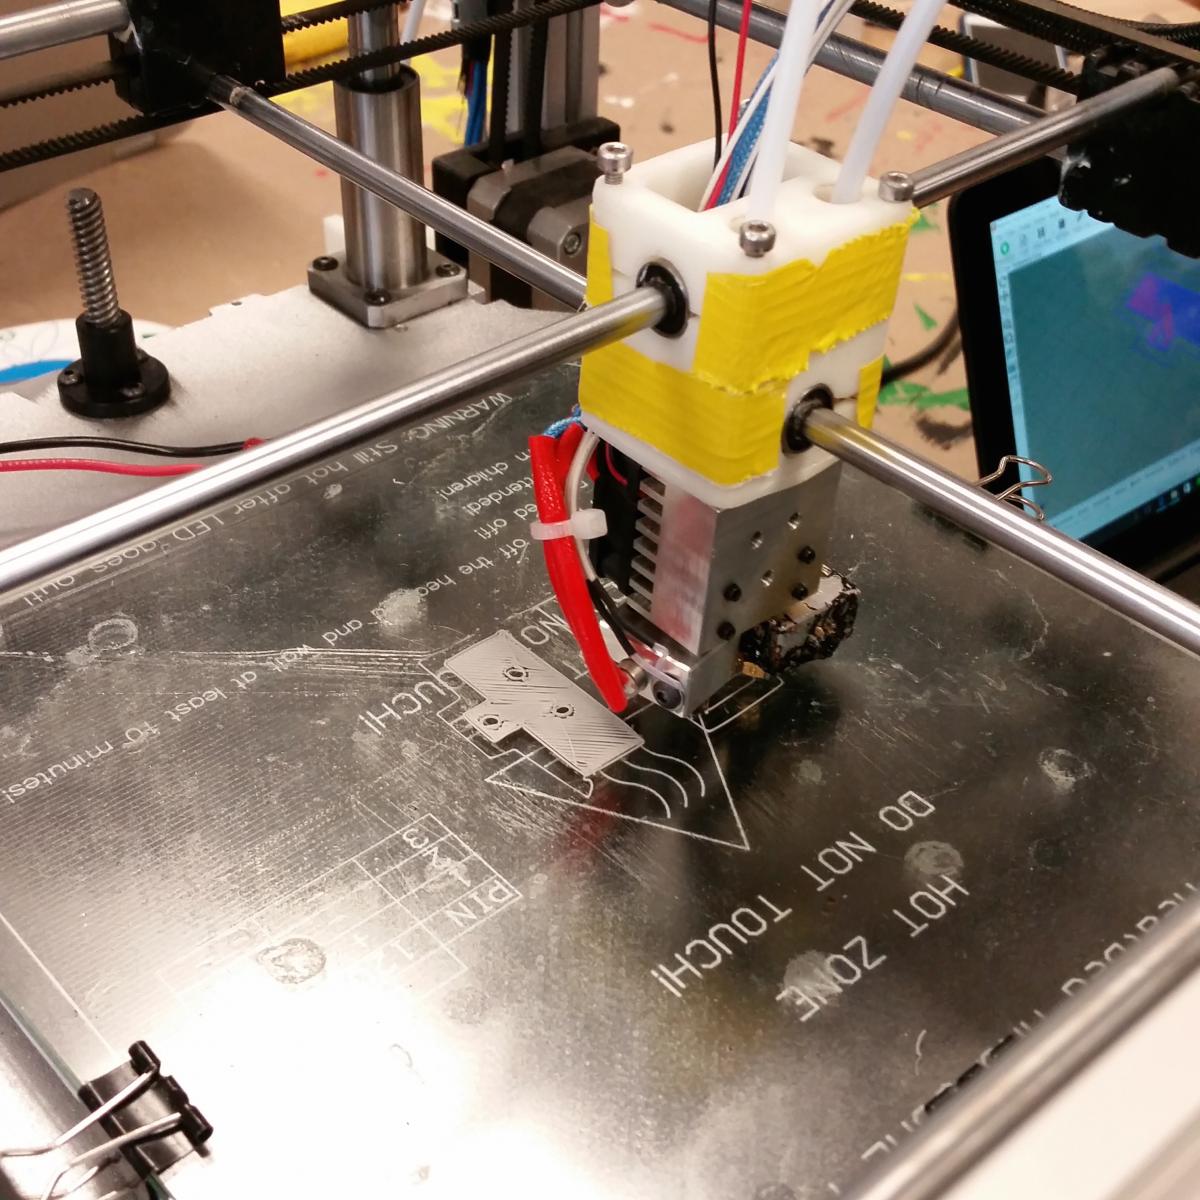 Our 3d printer hard at work